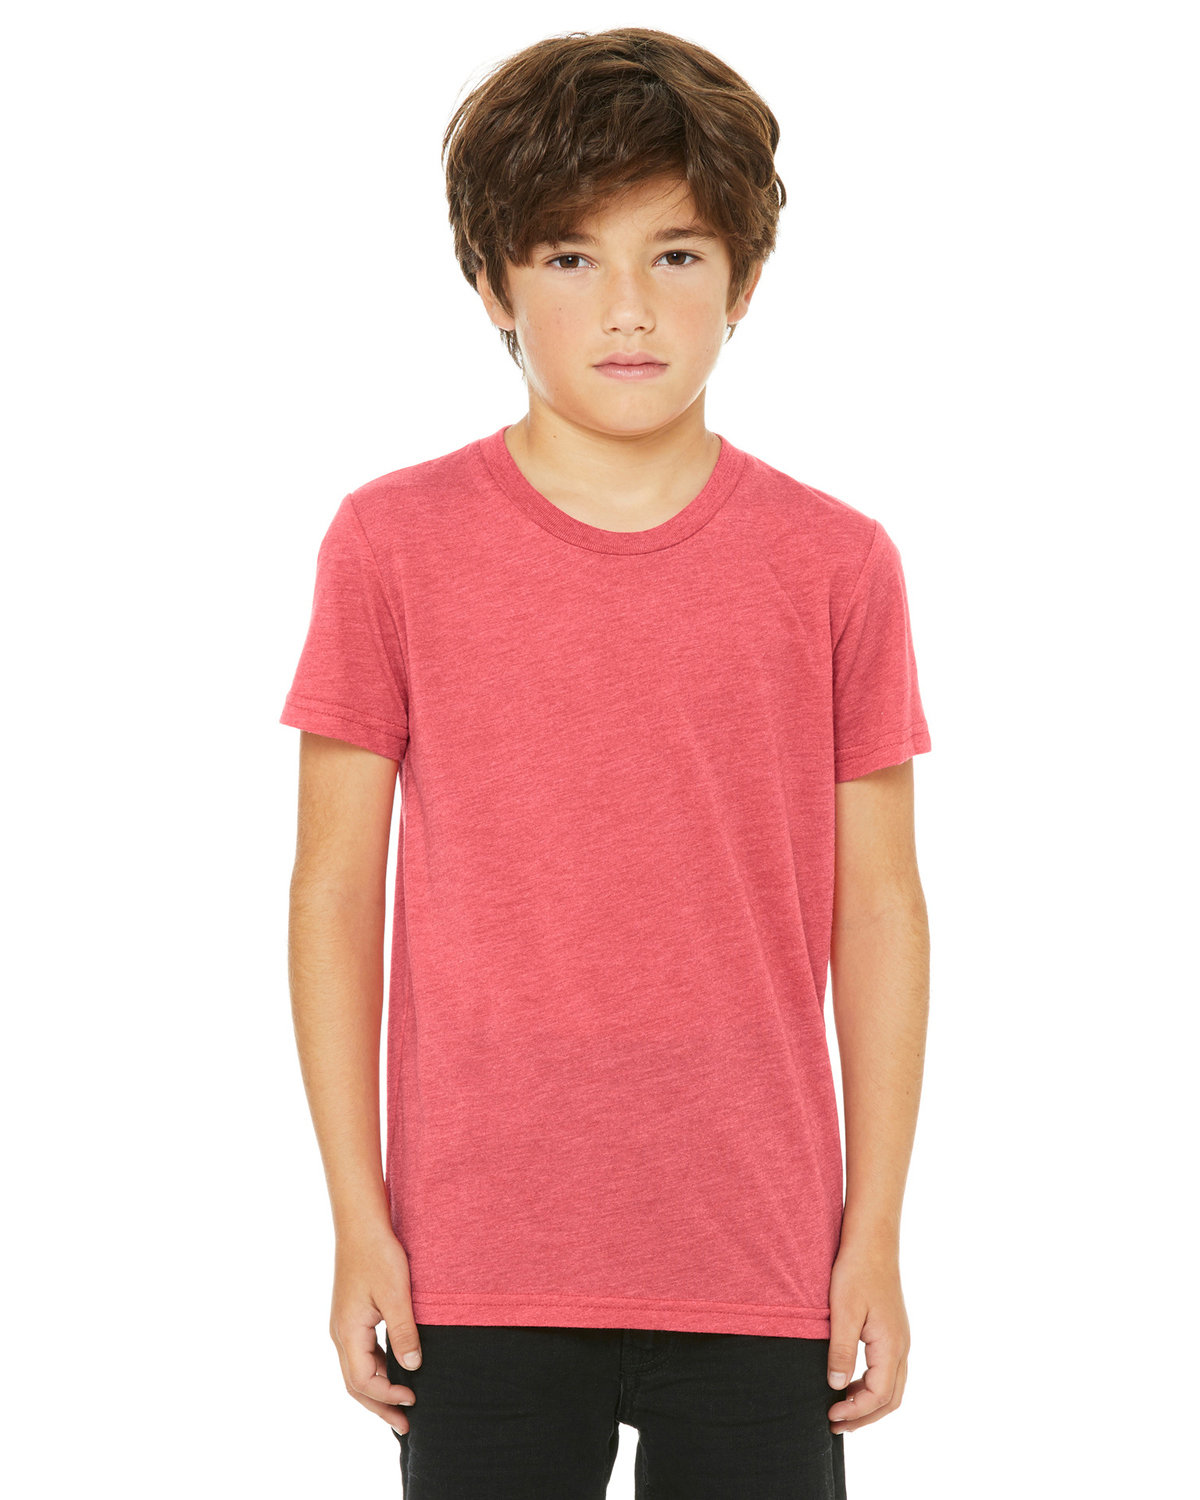 Bella + Canvas Youth Triblend Short-Sleeve T-Shirt RED TRIBLEND 